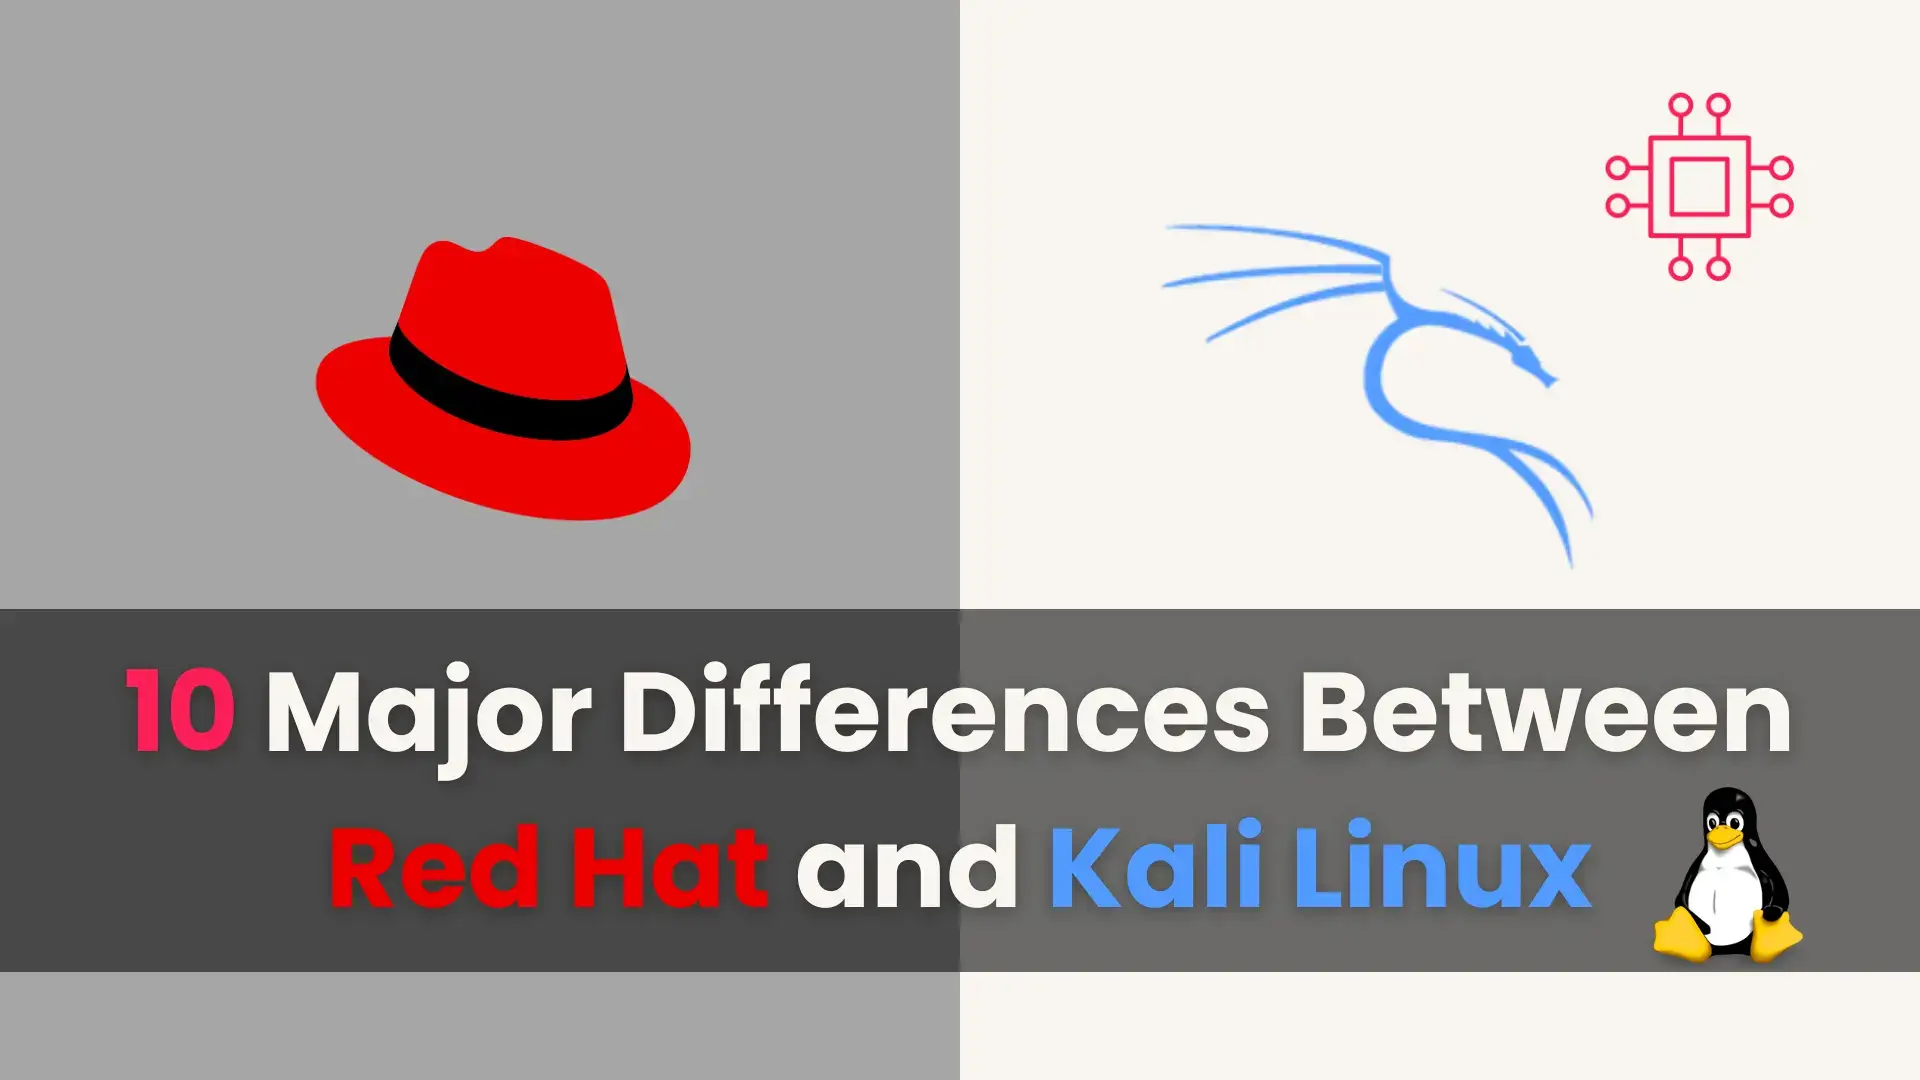 10 Major Differences Between Red Hat and Kali Linux